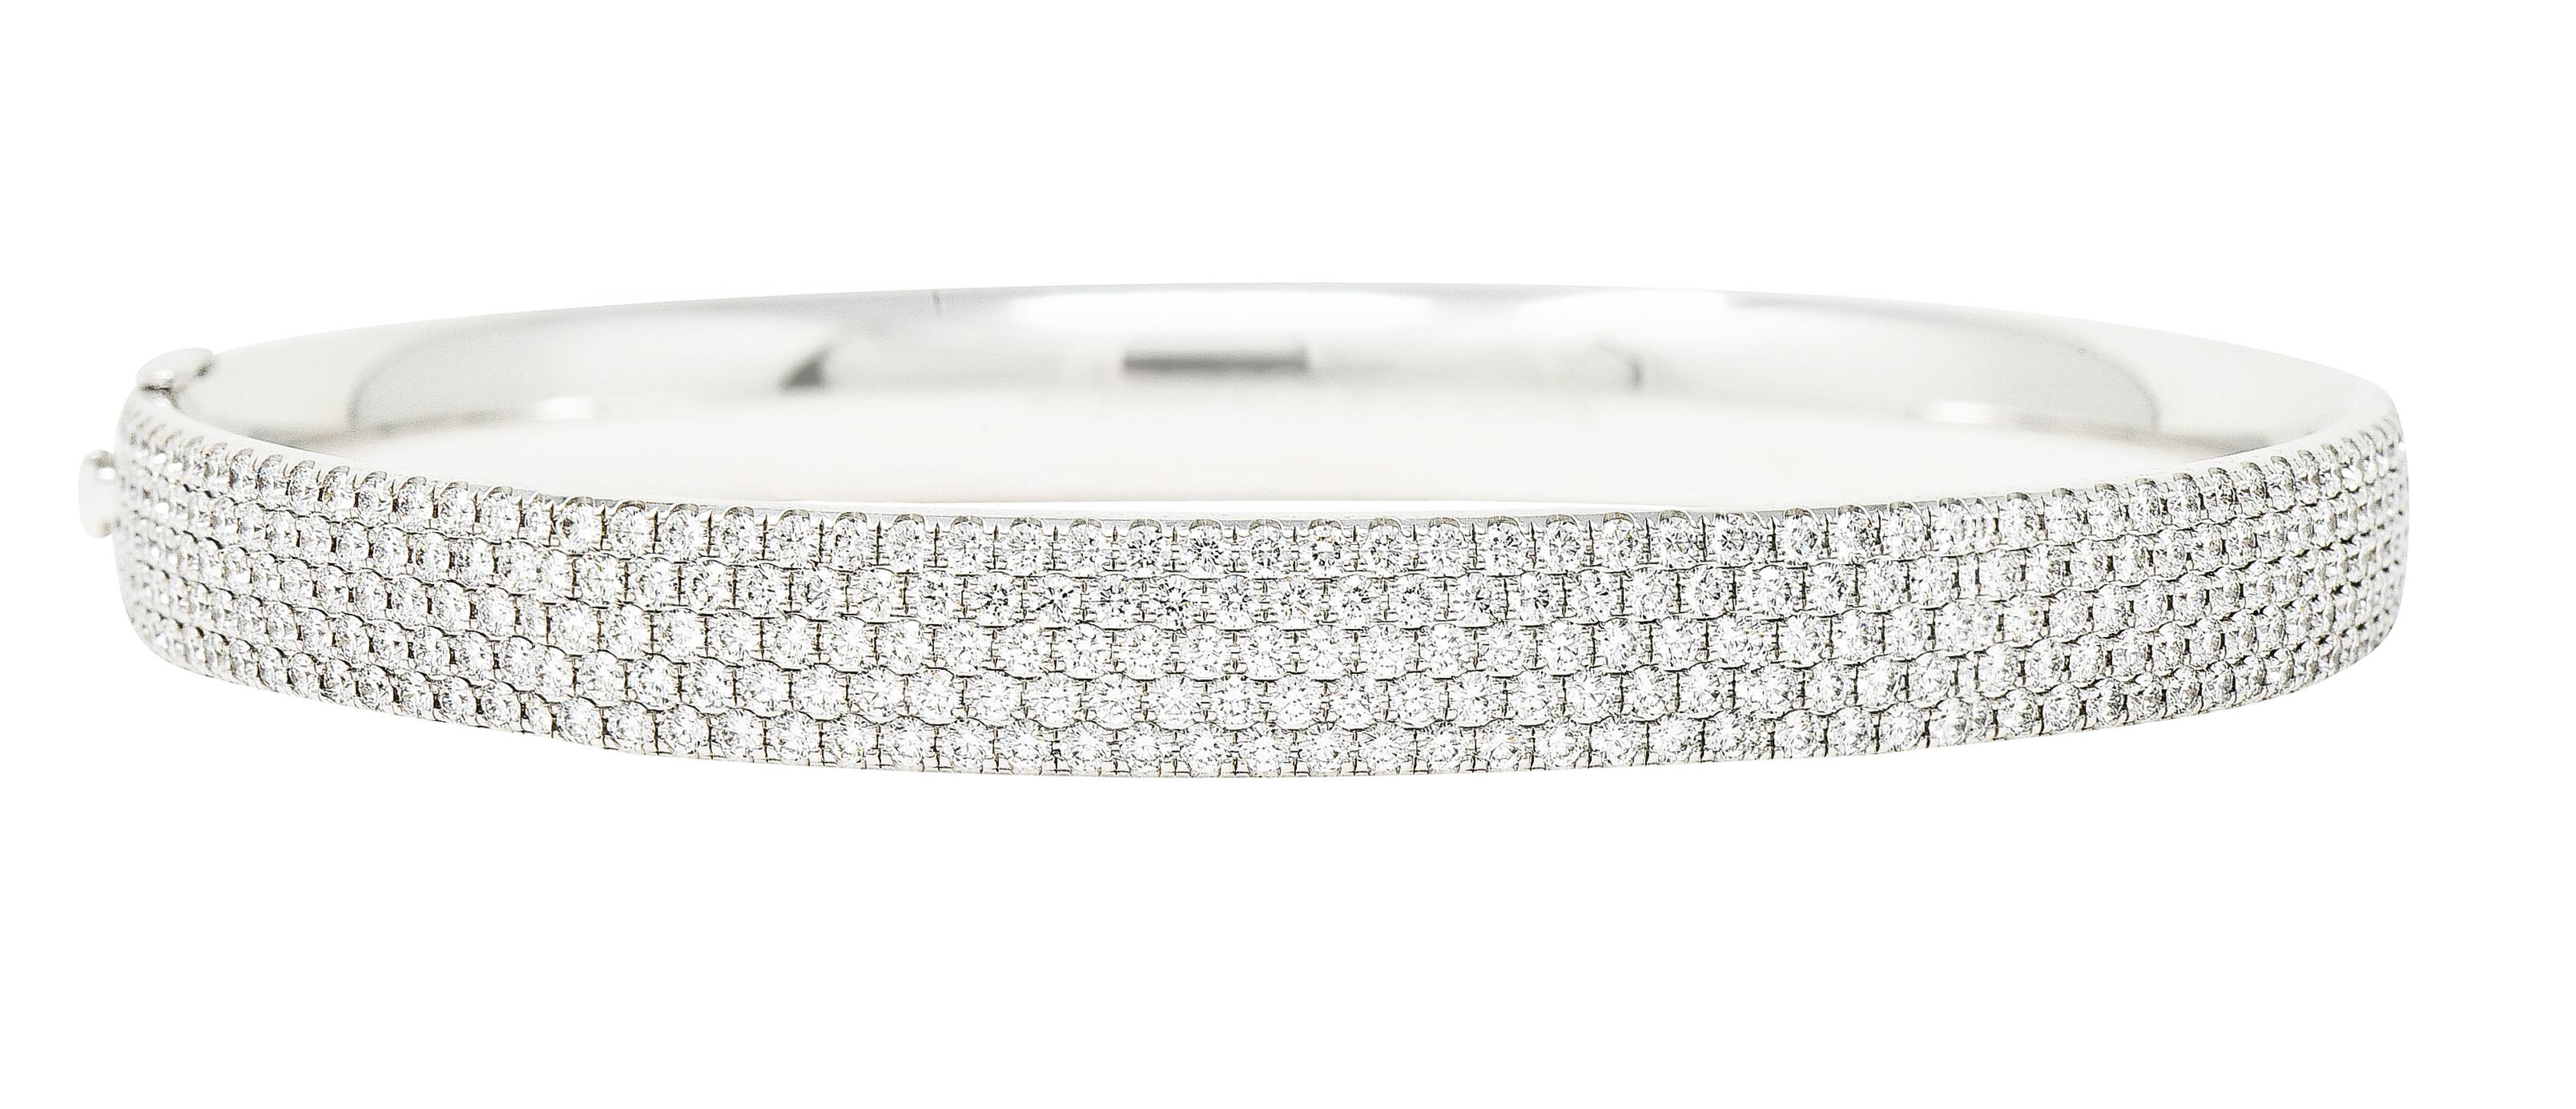 Hinged bangle bracelet is pavè set to front by five rows of round brilliant cut diamonds. Weighing collectively approximately 4.96 carats with F/G color and overall VS clarity. Completed by a concealed clasp with secure fold-over safety. Stamped